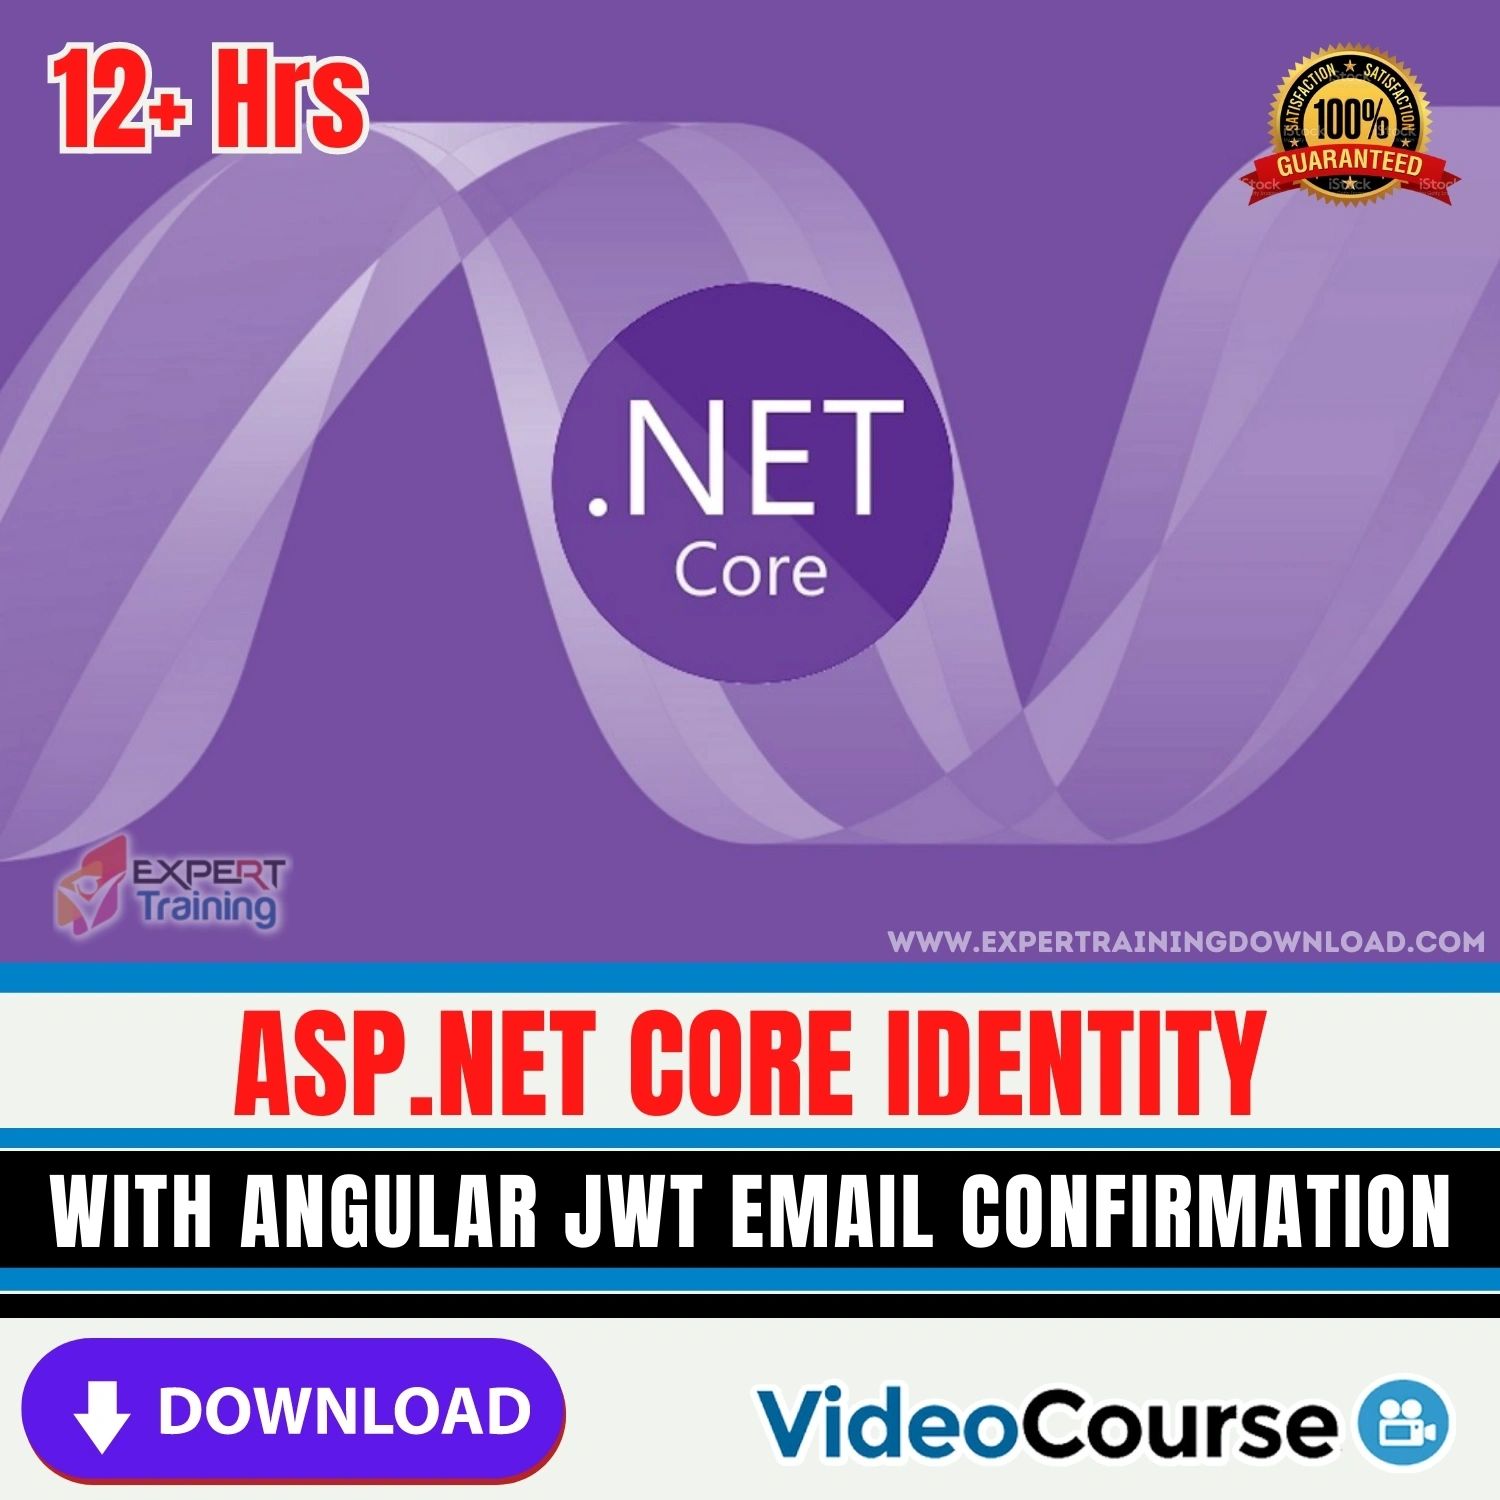 ASPNET Core Identity with Angular ( JWT Email Confirmation )